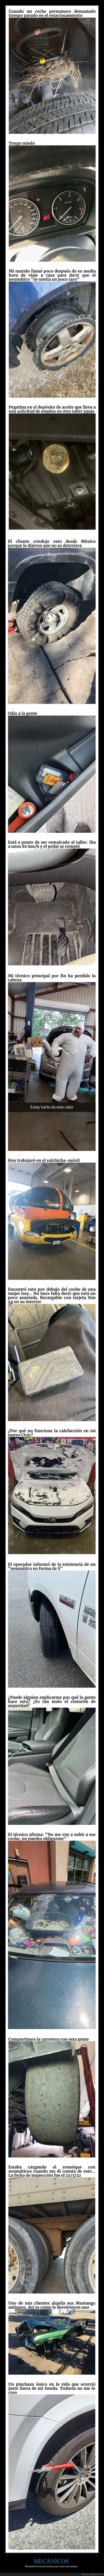 mecánicos,coches,wtf